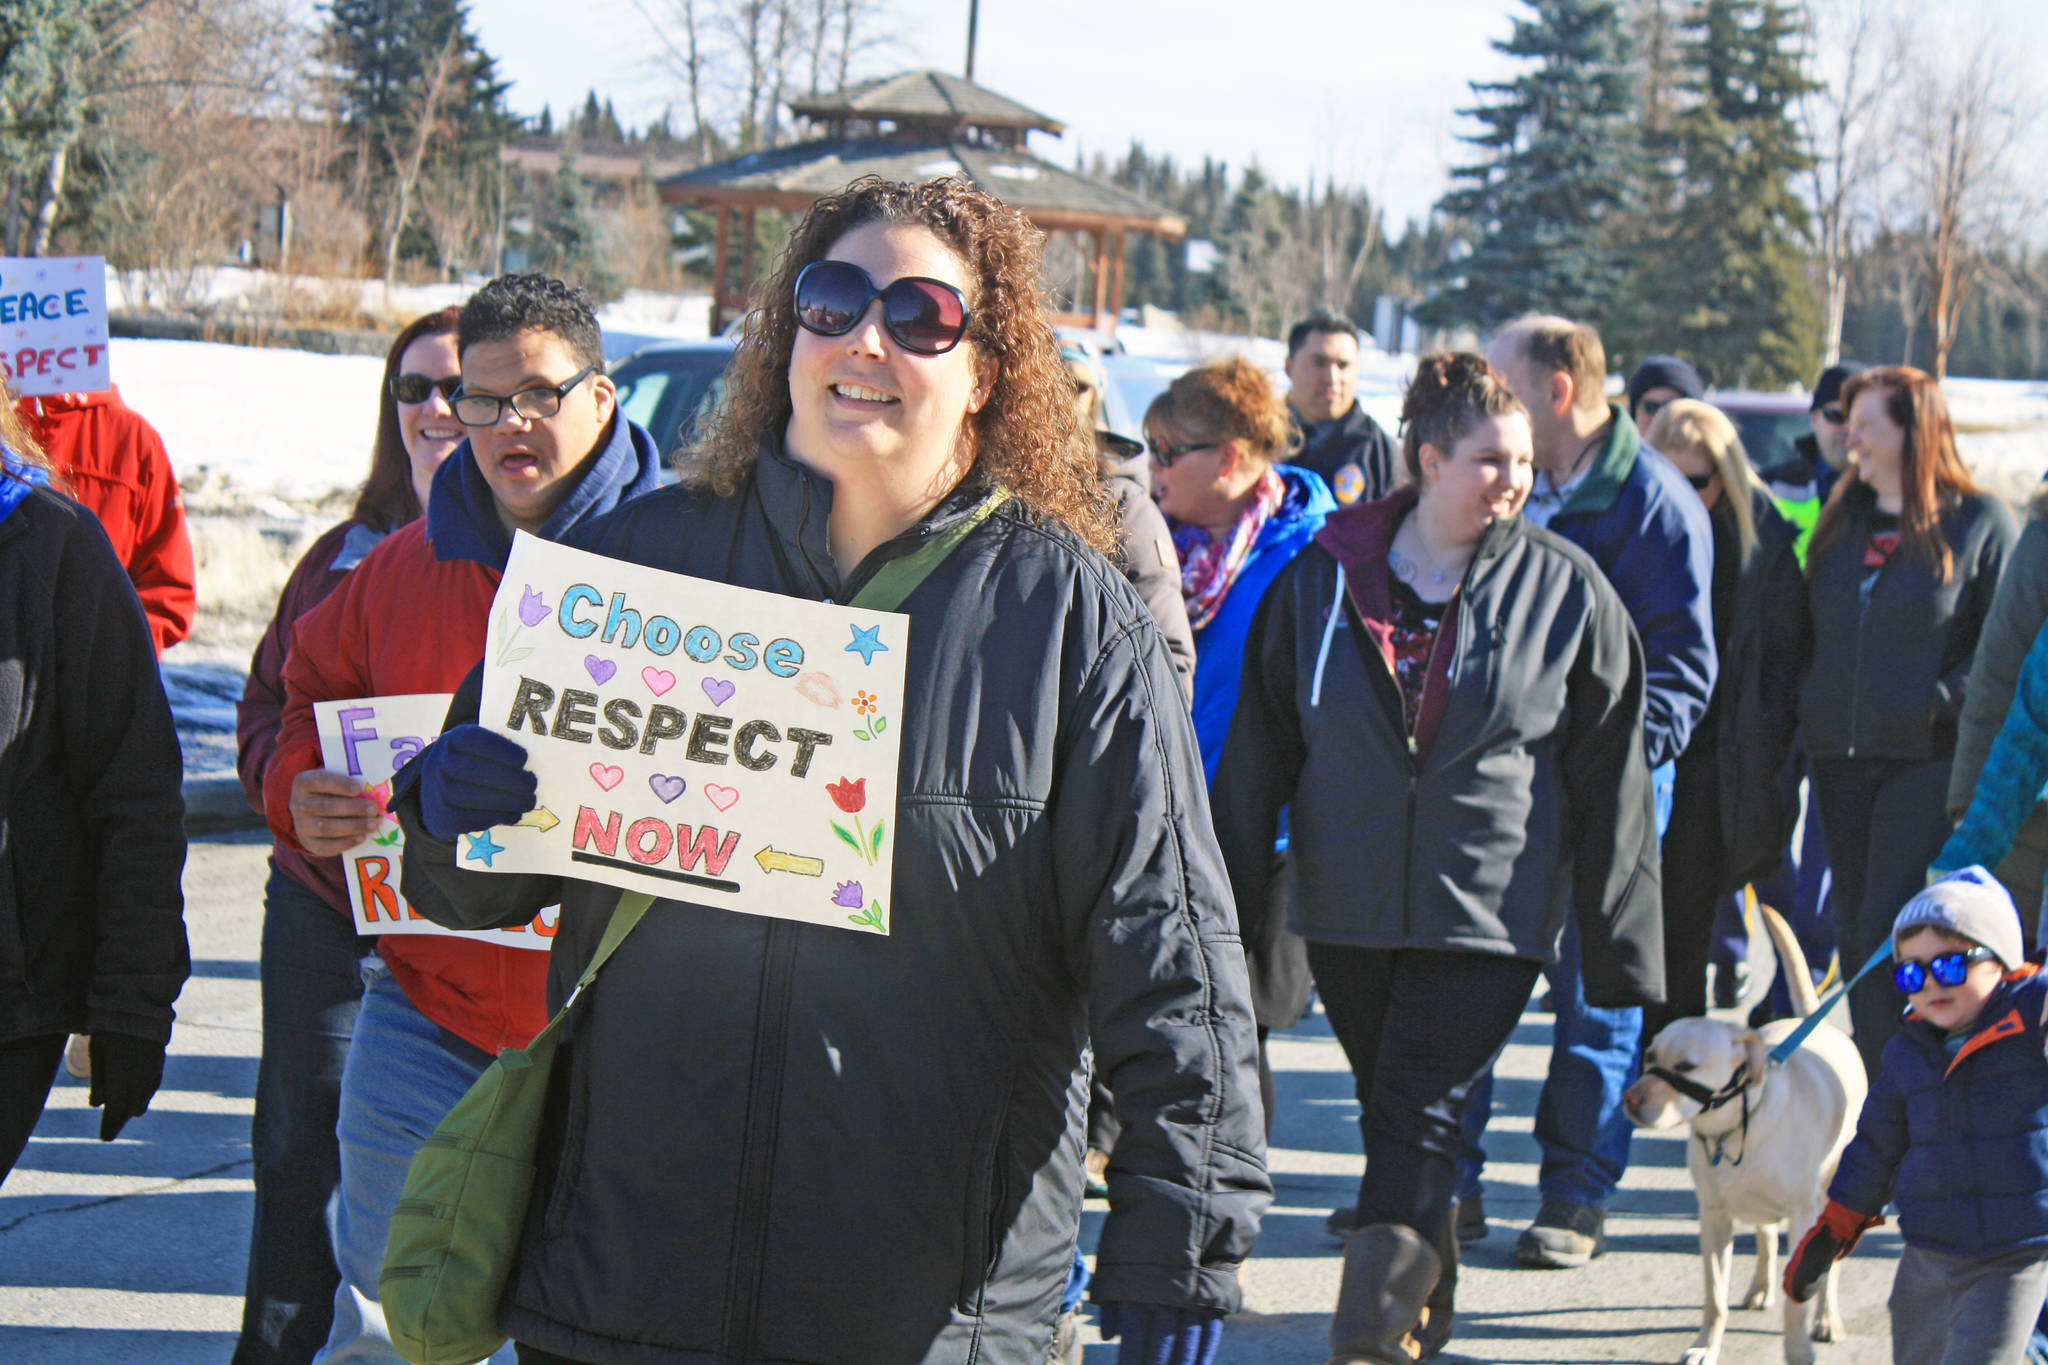 A participant in the Alaskans Choose Respect Awareness Event promotes the “choose respect” message during a march to the Kenai Visitor and Cultural Center in Kenai on March 28. Hosted by the LeeShore Center, the event aimed to bring awareness to the issue of domestic violence and sexual assault. (Photo by Erin Thompson/Peninsula Clarion)